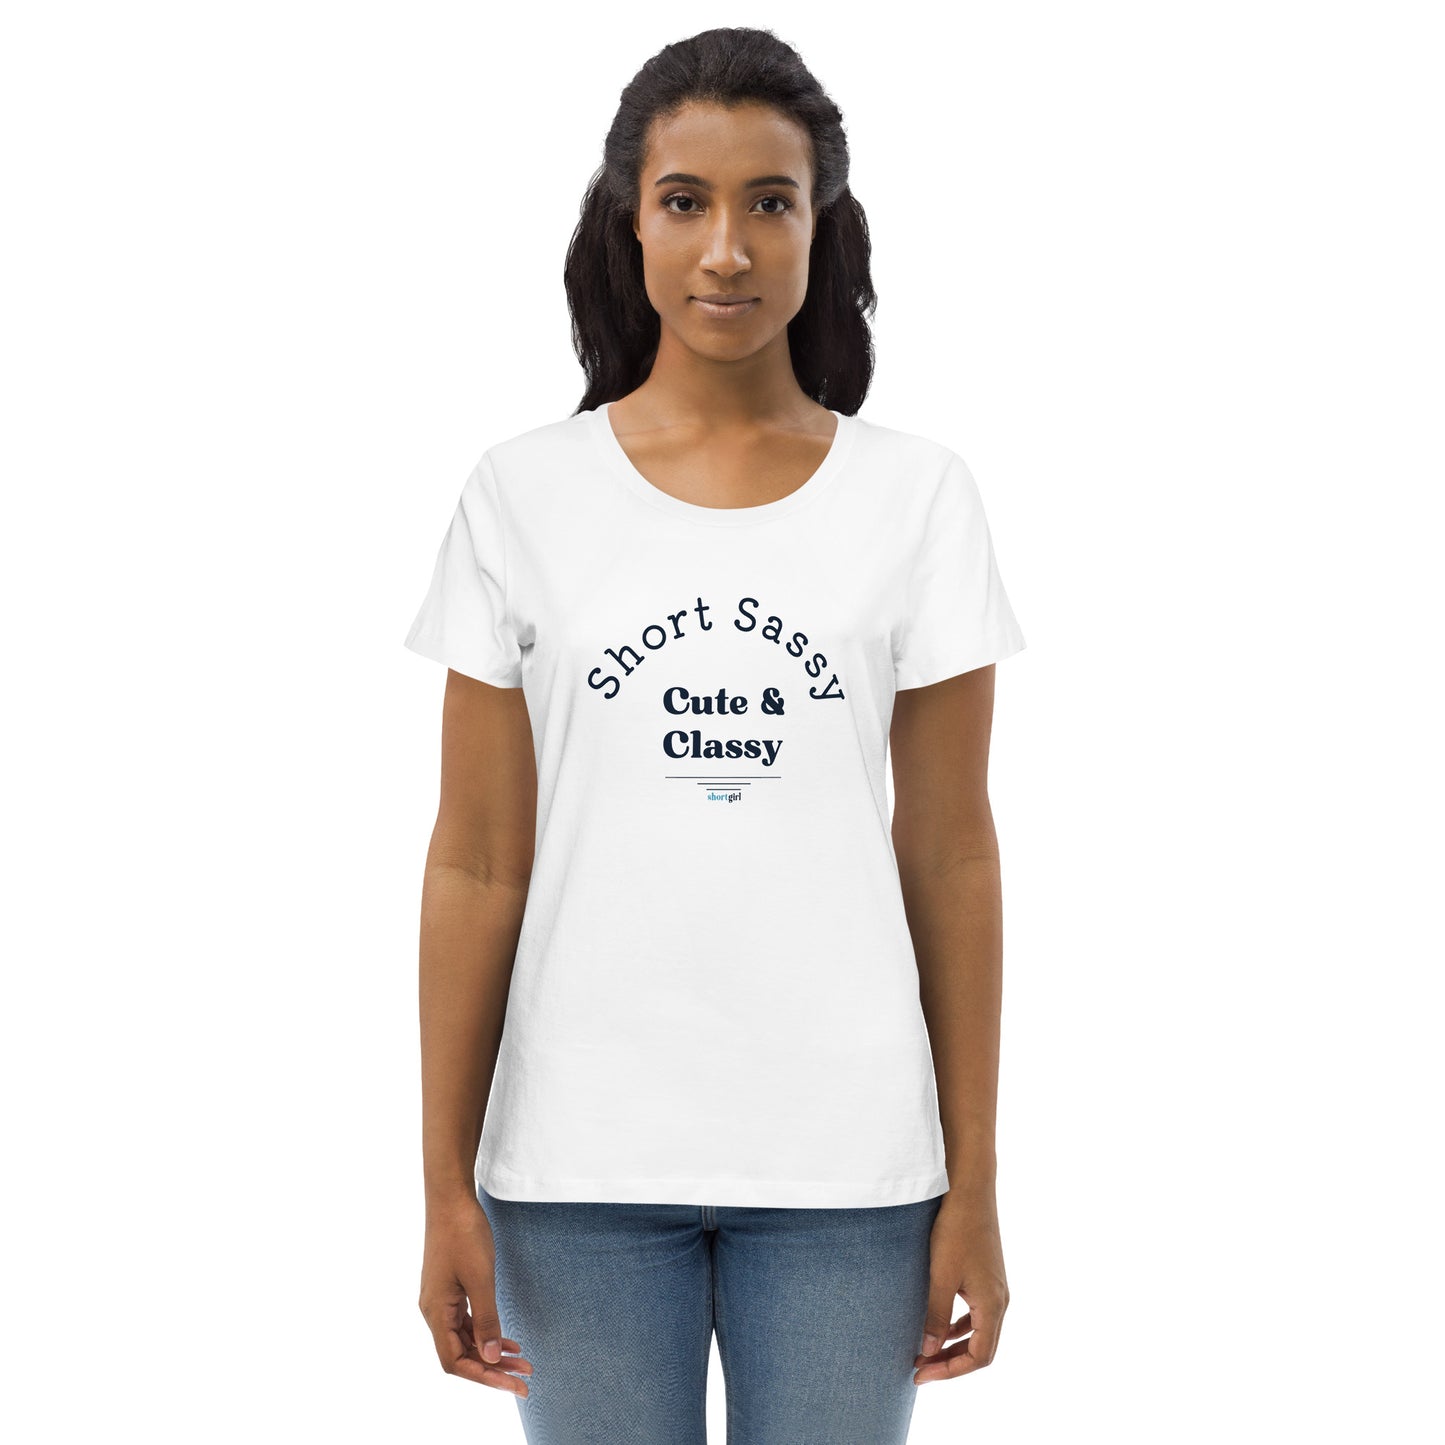 Women's fitted eco tee - Short, Sassy, Cute & Classy